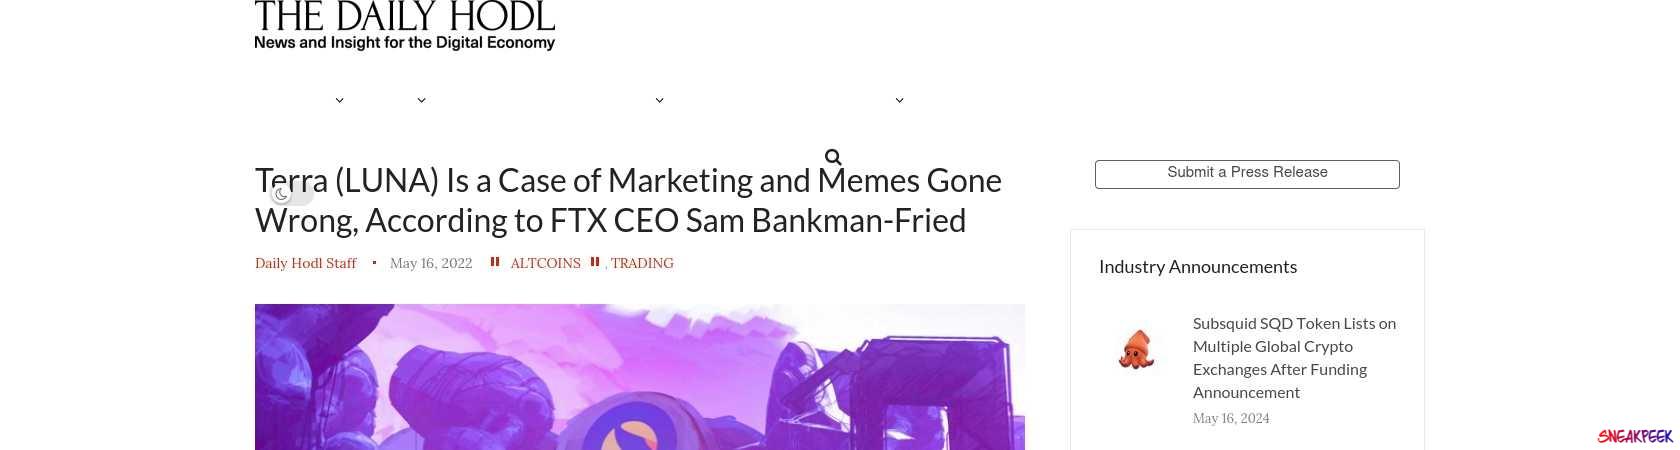 Read the full Article:  ⭲ Terra (LUNA) Is a Case of Marketing and Memes Gone Wrong, According to FTX CEO Sam Bankman-Fried